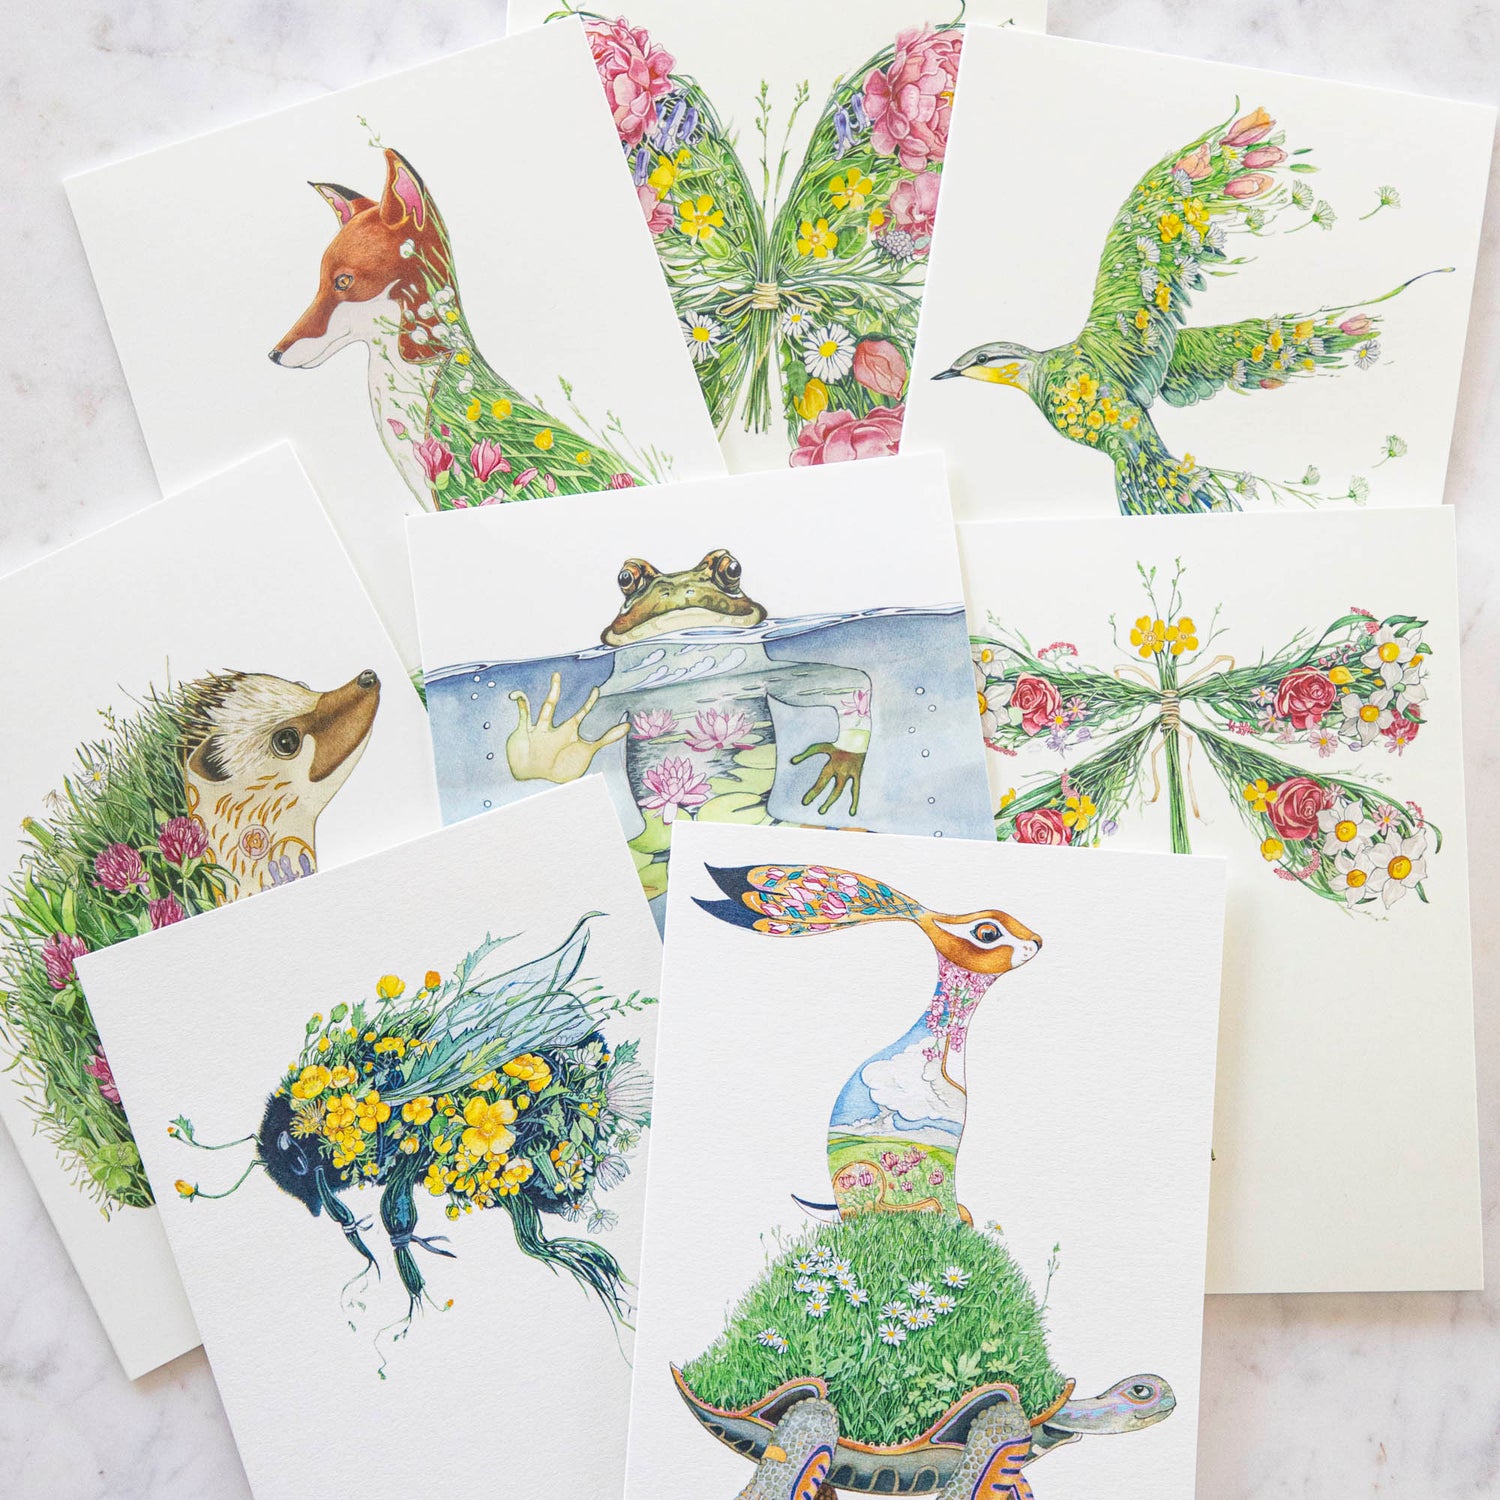 An artistically designed set of Dragonfly Cards featuring intricate watercolor paintings of various animals and flowers by The DM Collection.